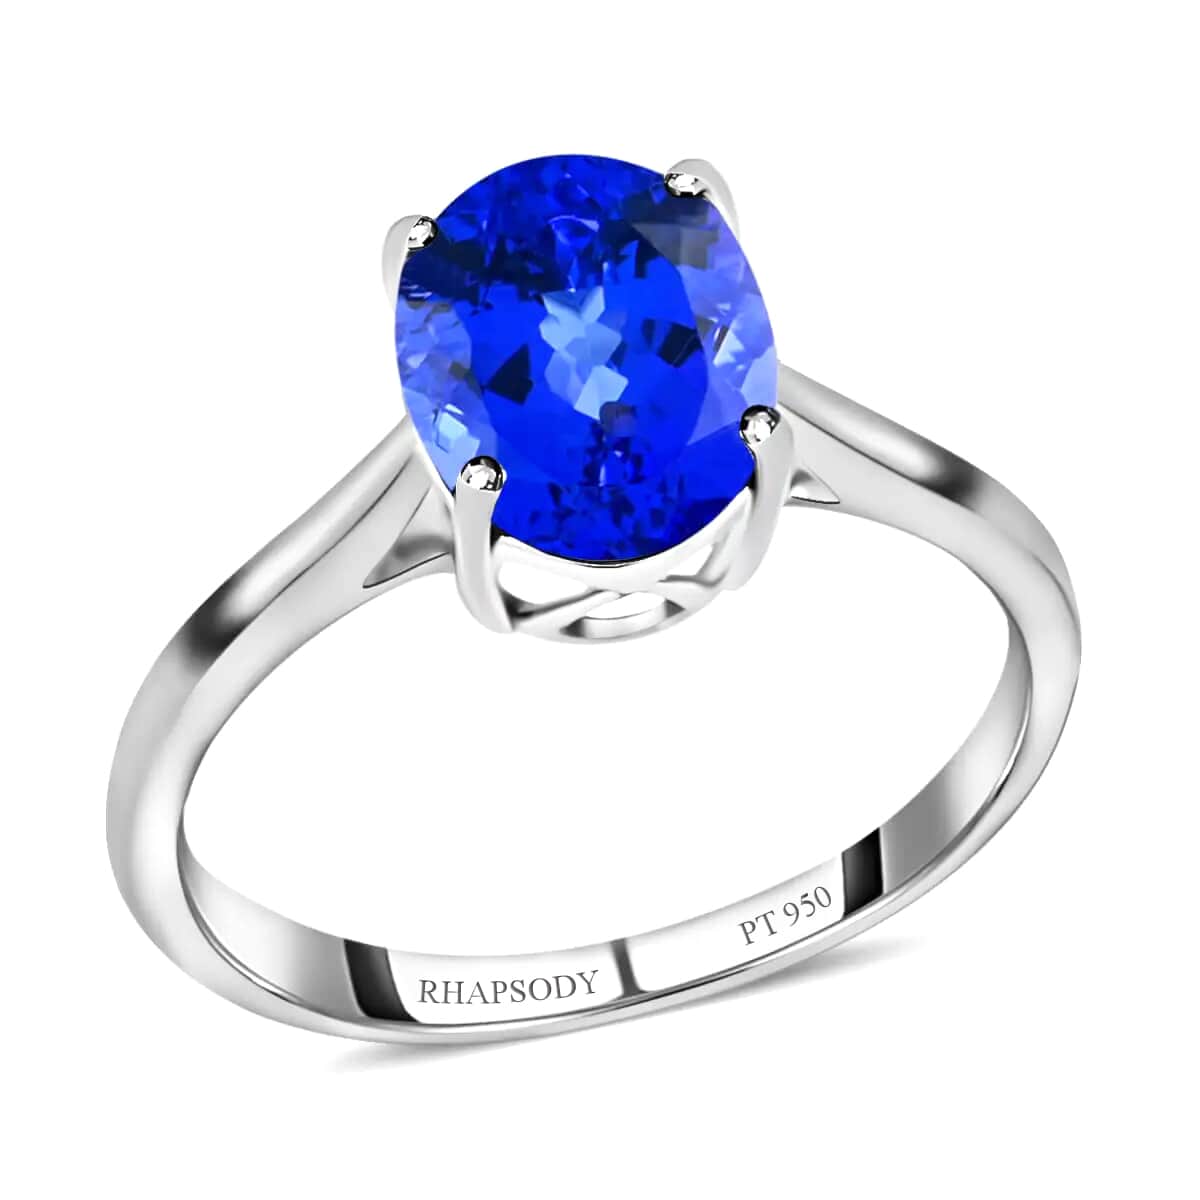 Certified and Appraised Rhapsody 950 Platinum AAAA Tanzanite Ring, Diamond Ring, Solitaire Engagement Rings, Promise Rings For Women 2.90 ctw (Size 10) image number 0